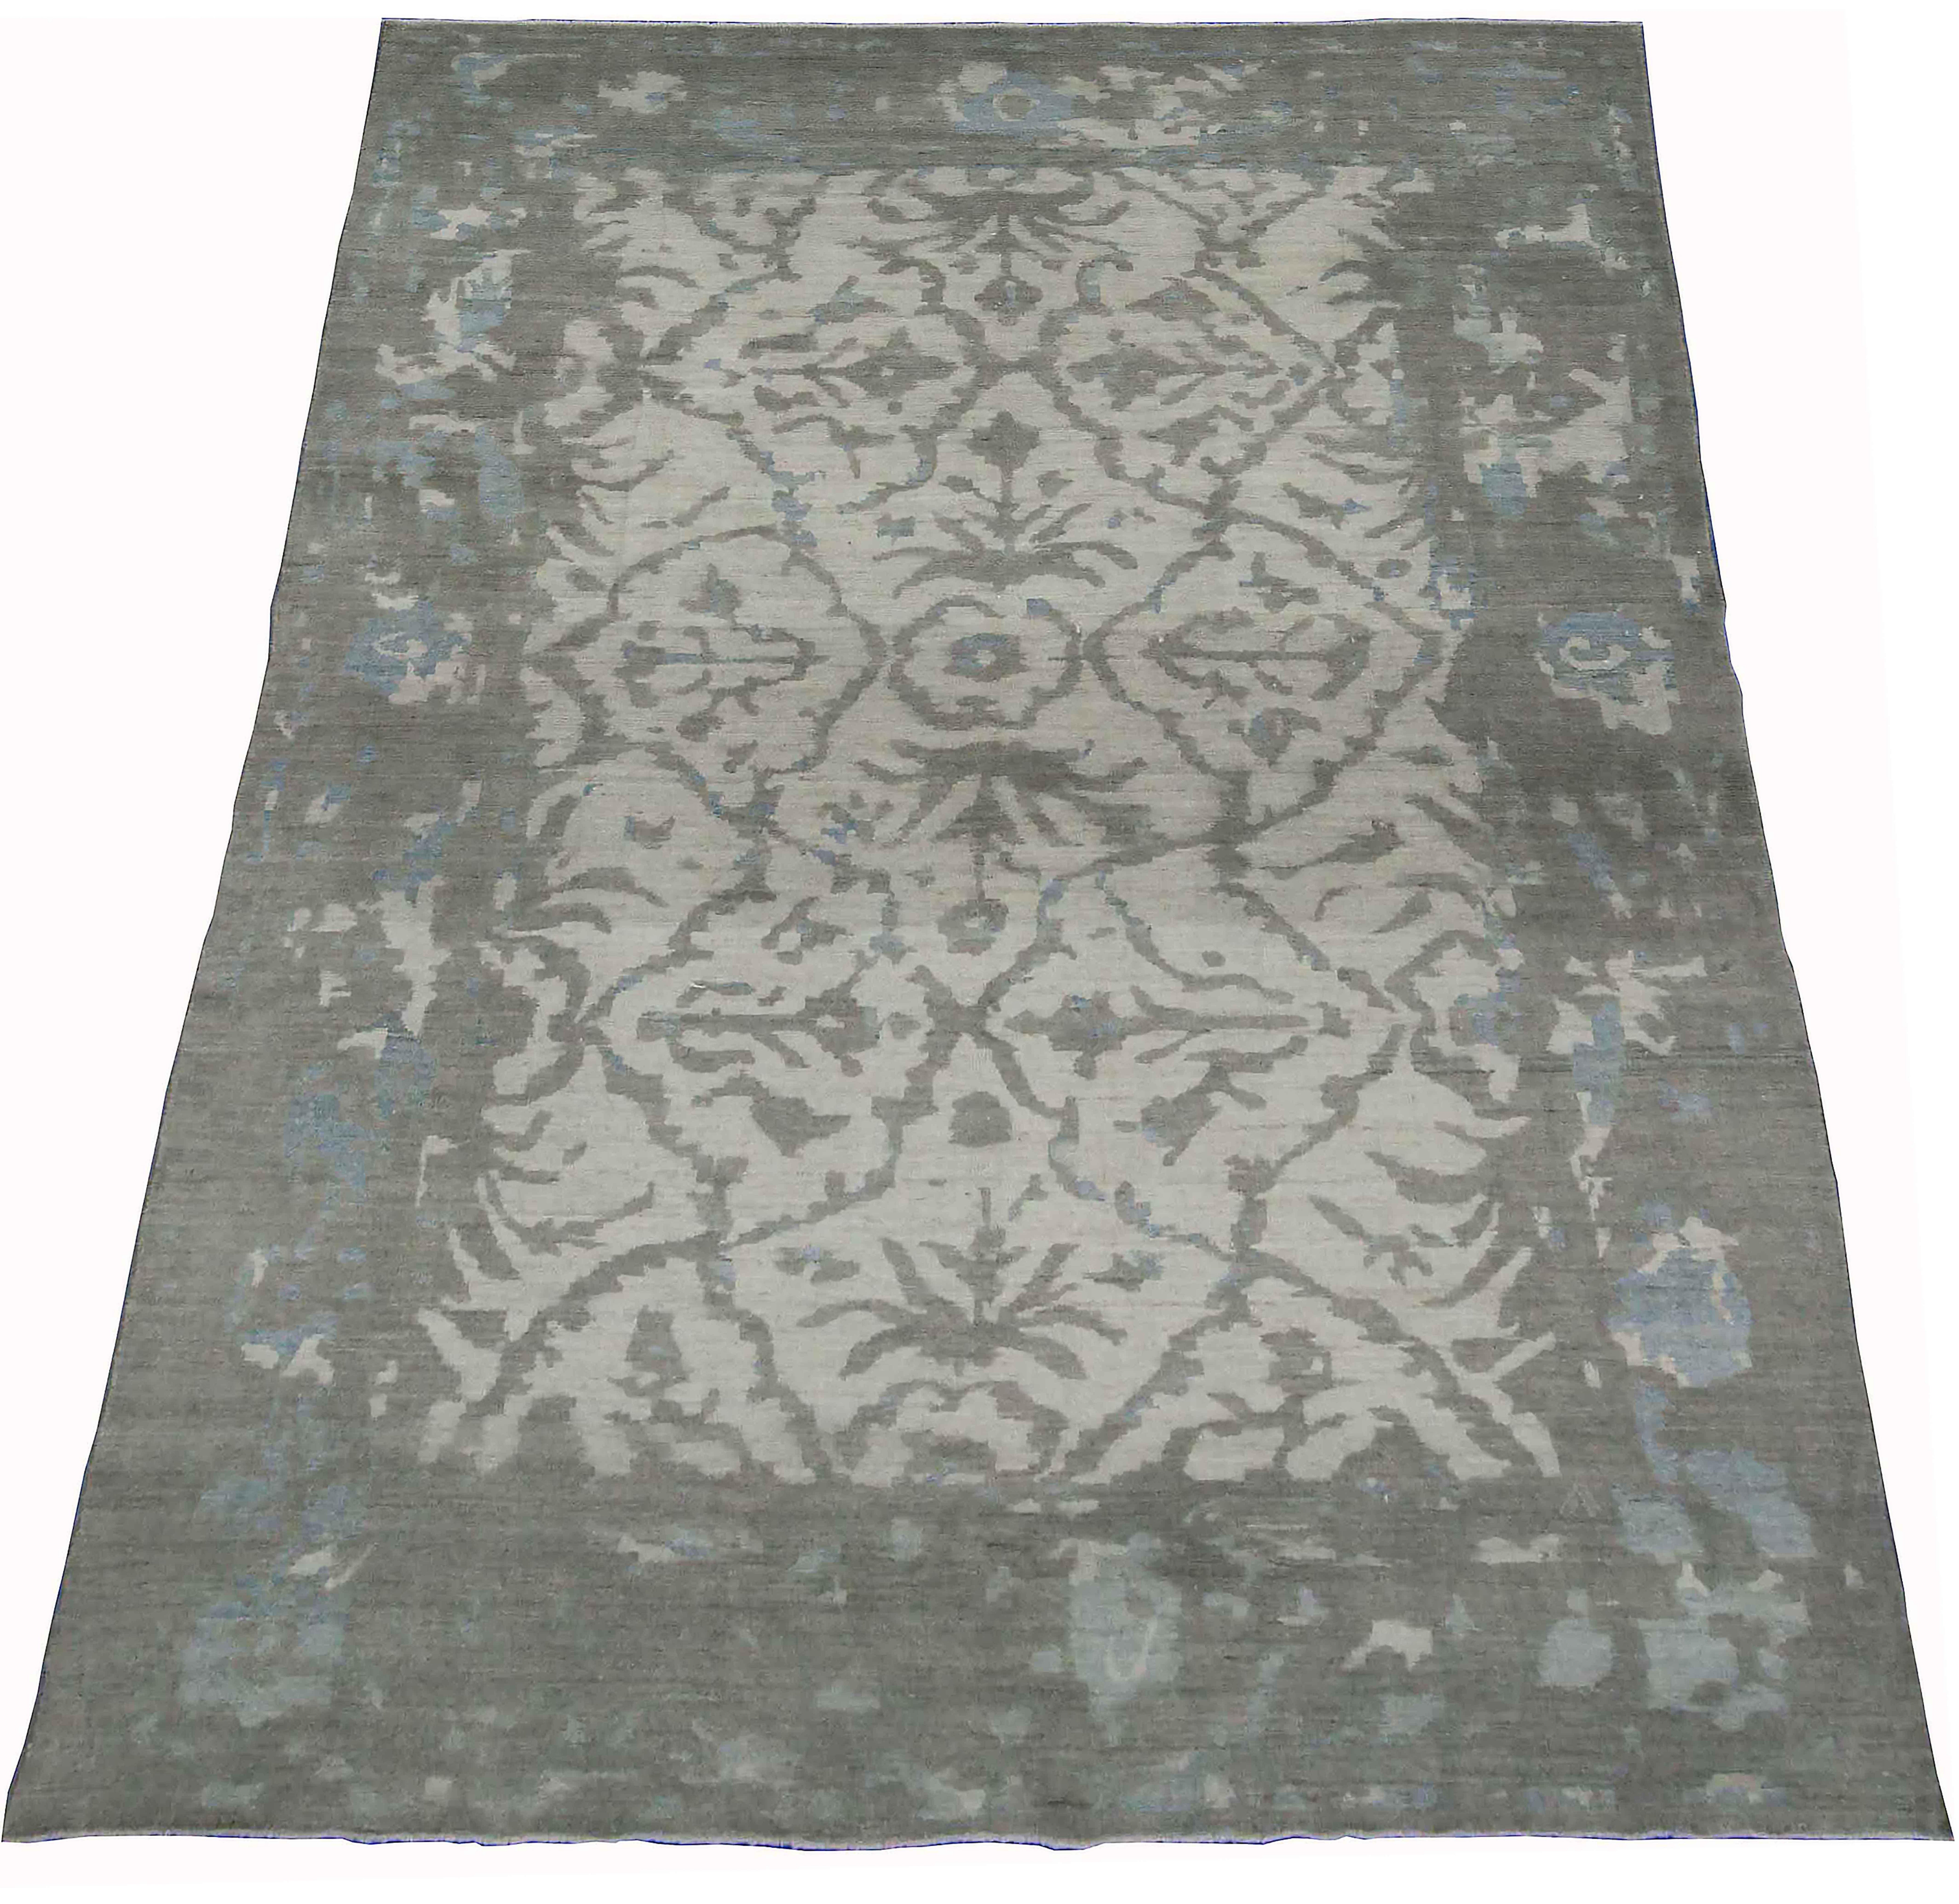 New Persian rug made of handwoven sheep’s wool of the finest quality. It’s colored with organic vegetable dyes that are certified safe for humans and pets alike. It features floral details in light and dark gray over an ivory field. Flower patterns